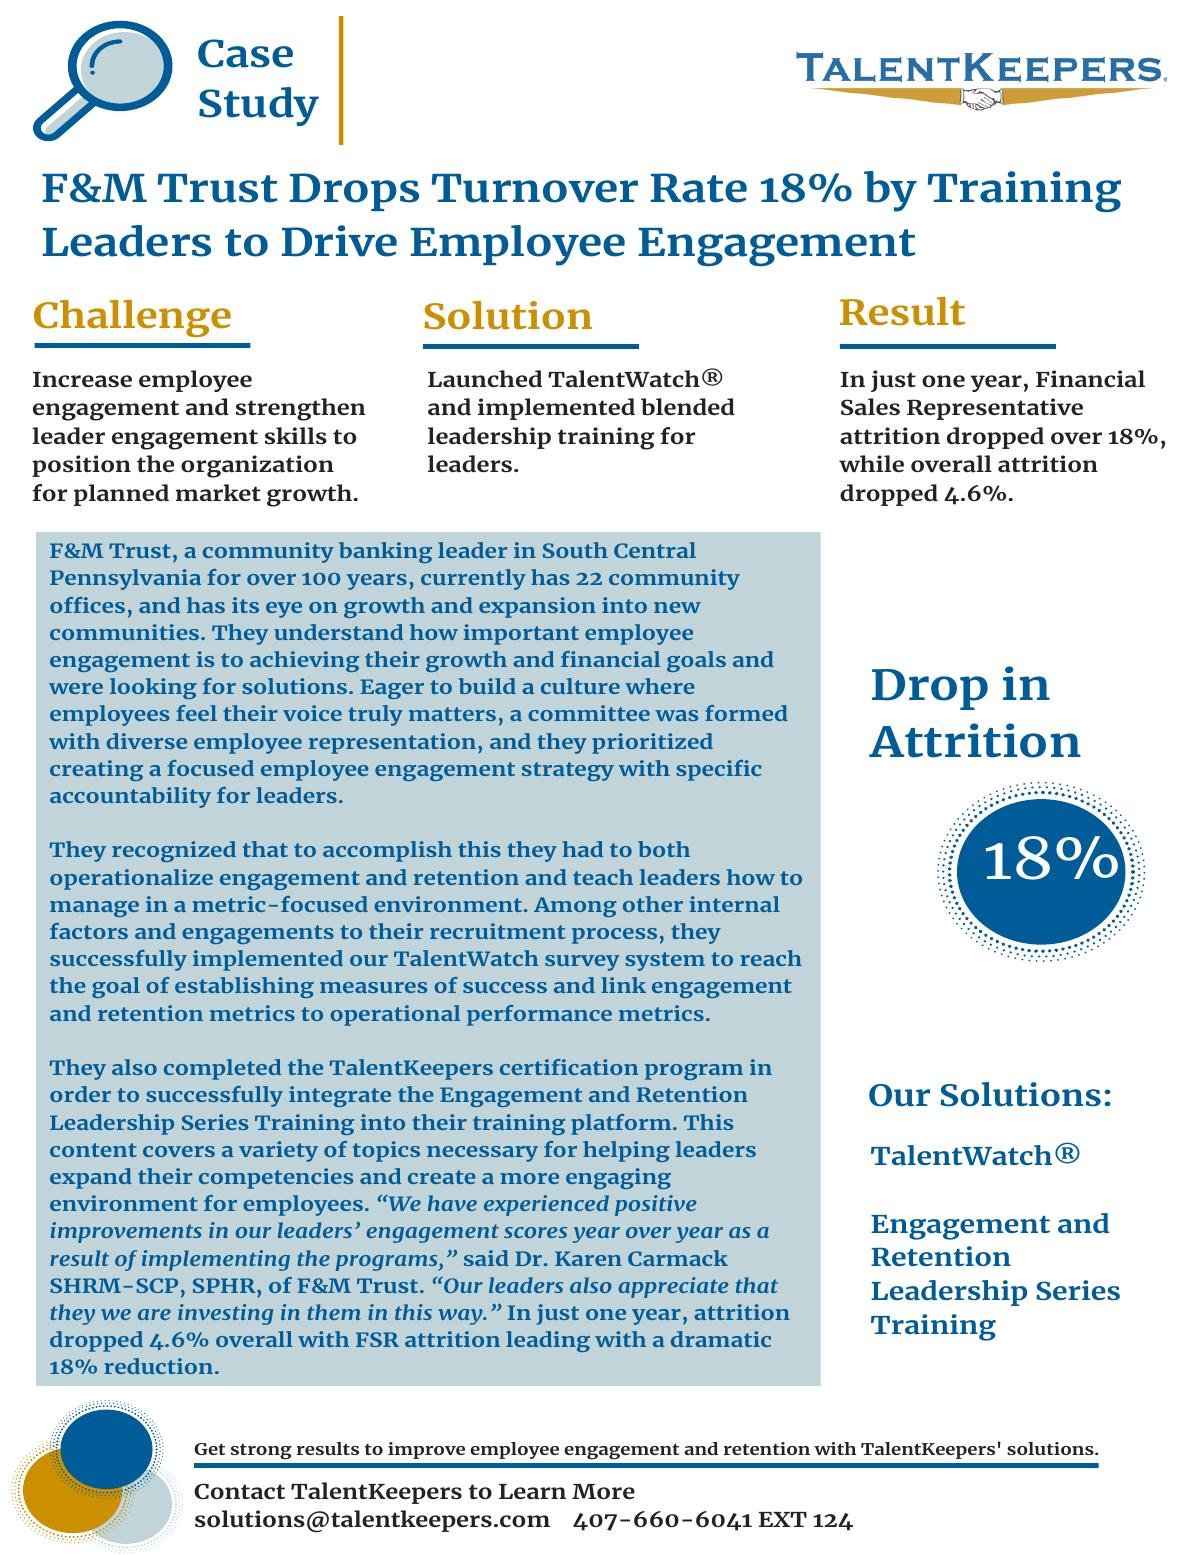 F&M Trust Drops Turnover Rate 18% by Training Leaders to Drive Employee Engagement